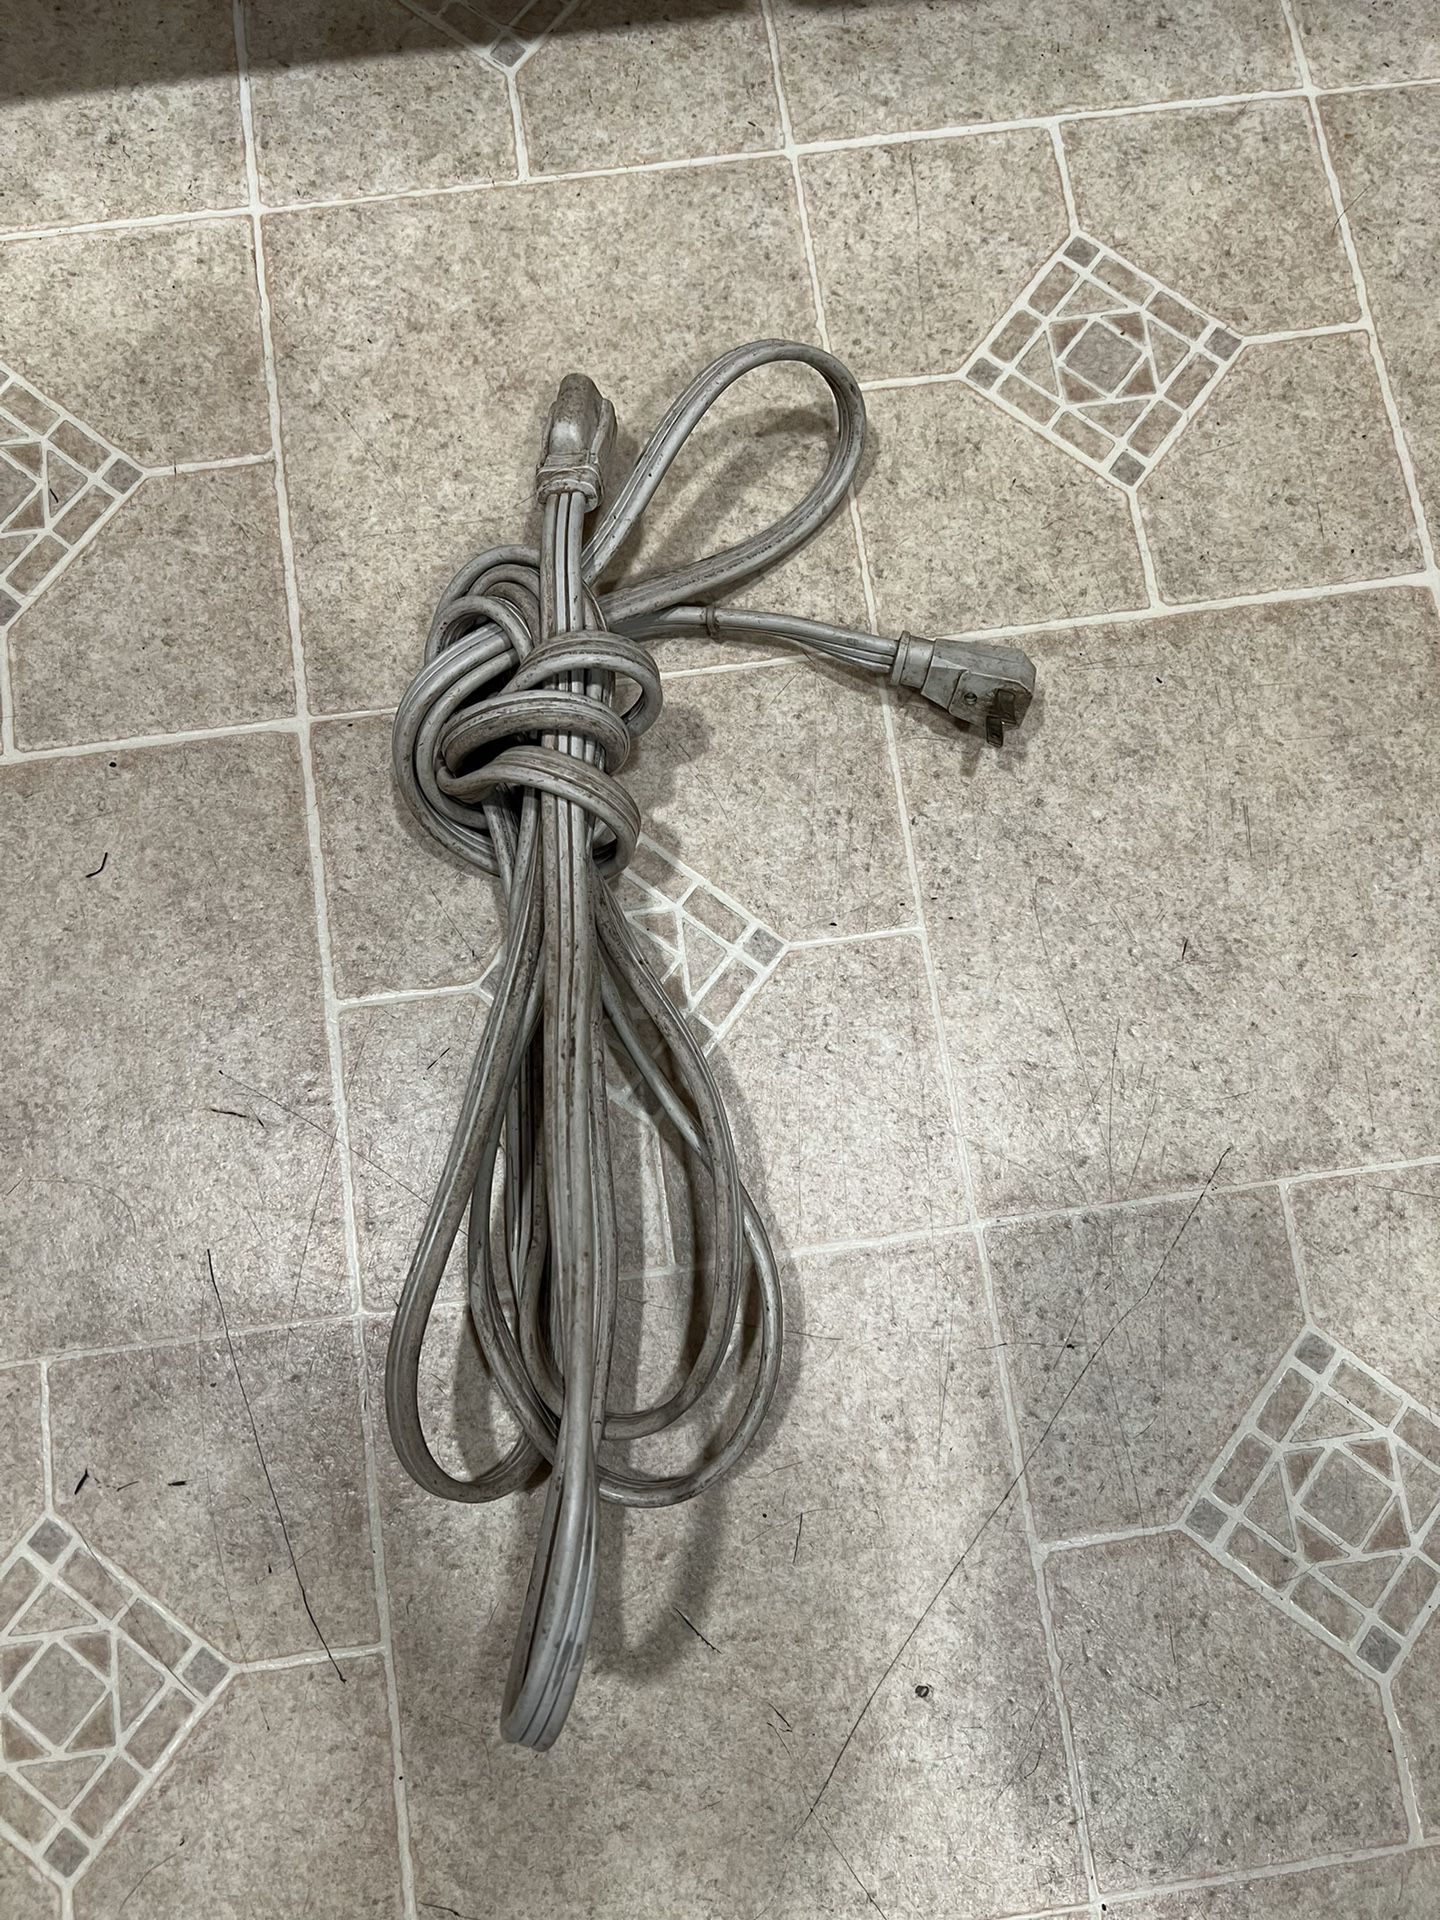 Extension Cord 